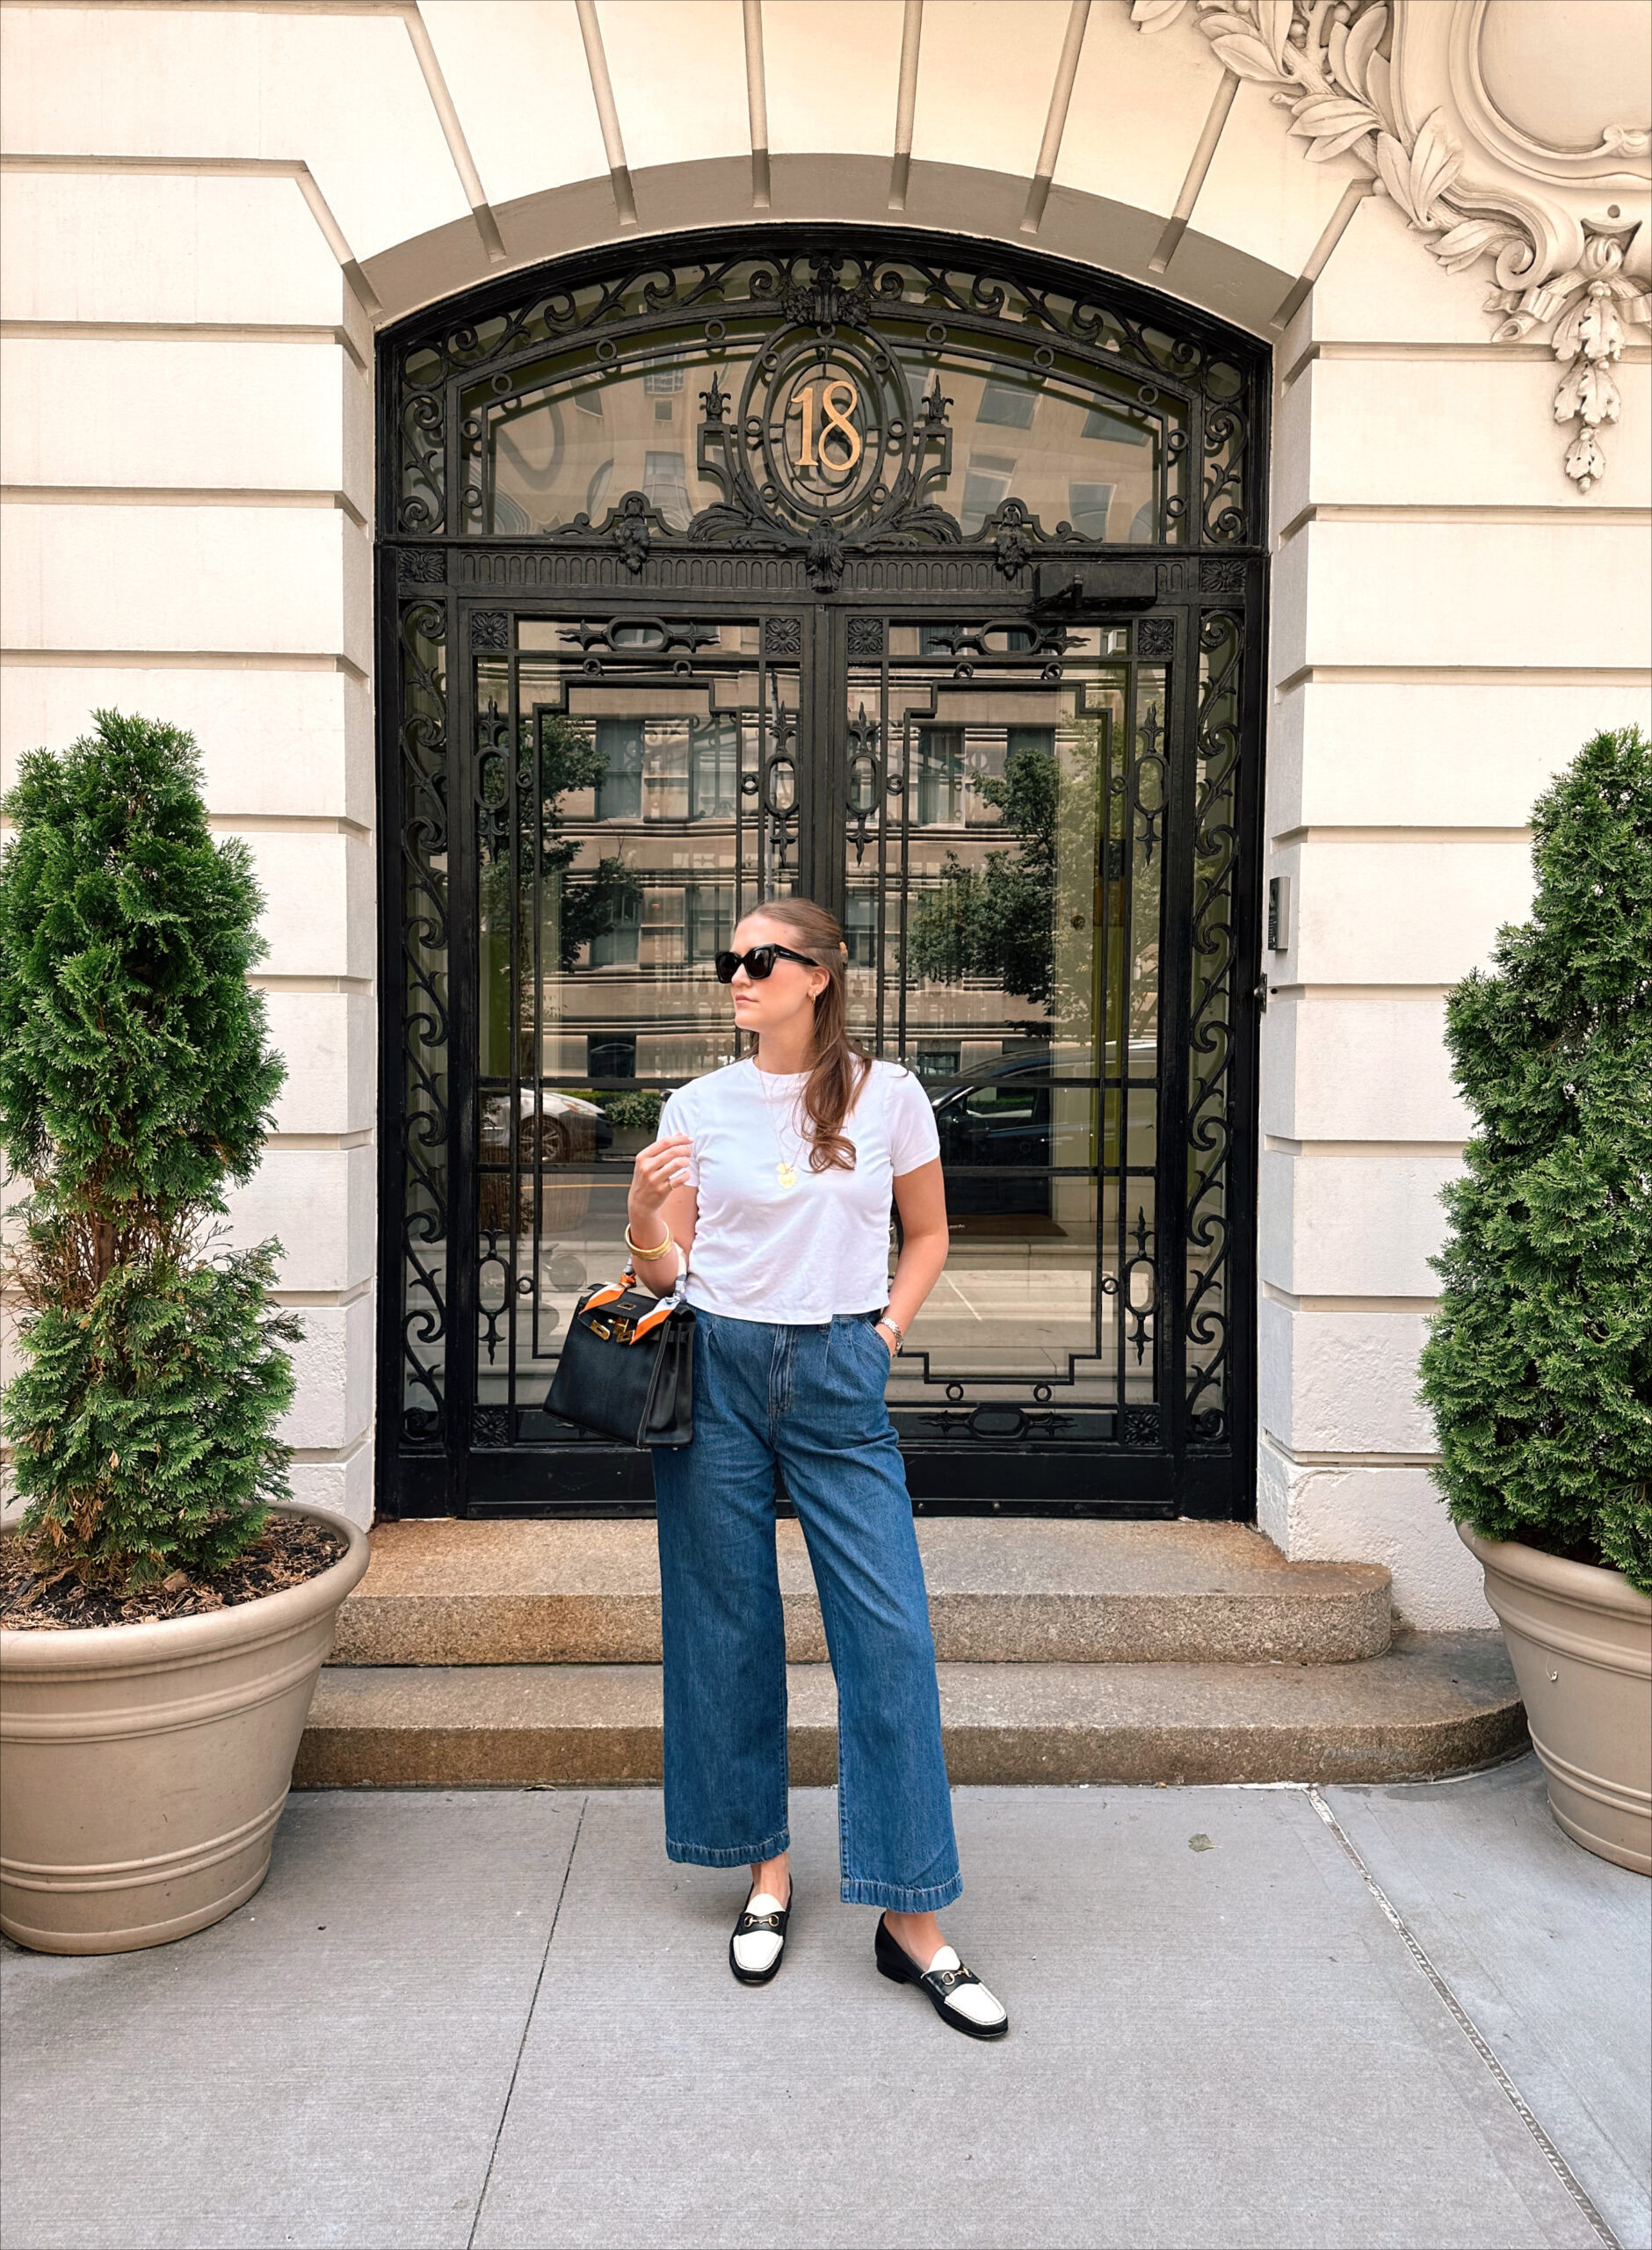 Anna standing in front of a beautifully ornate door in New York City wearing a white top and blue jeans.